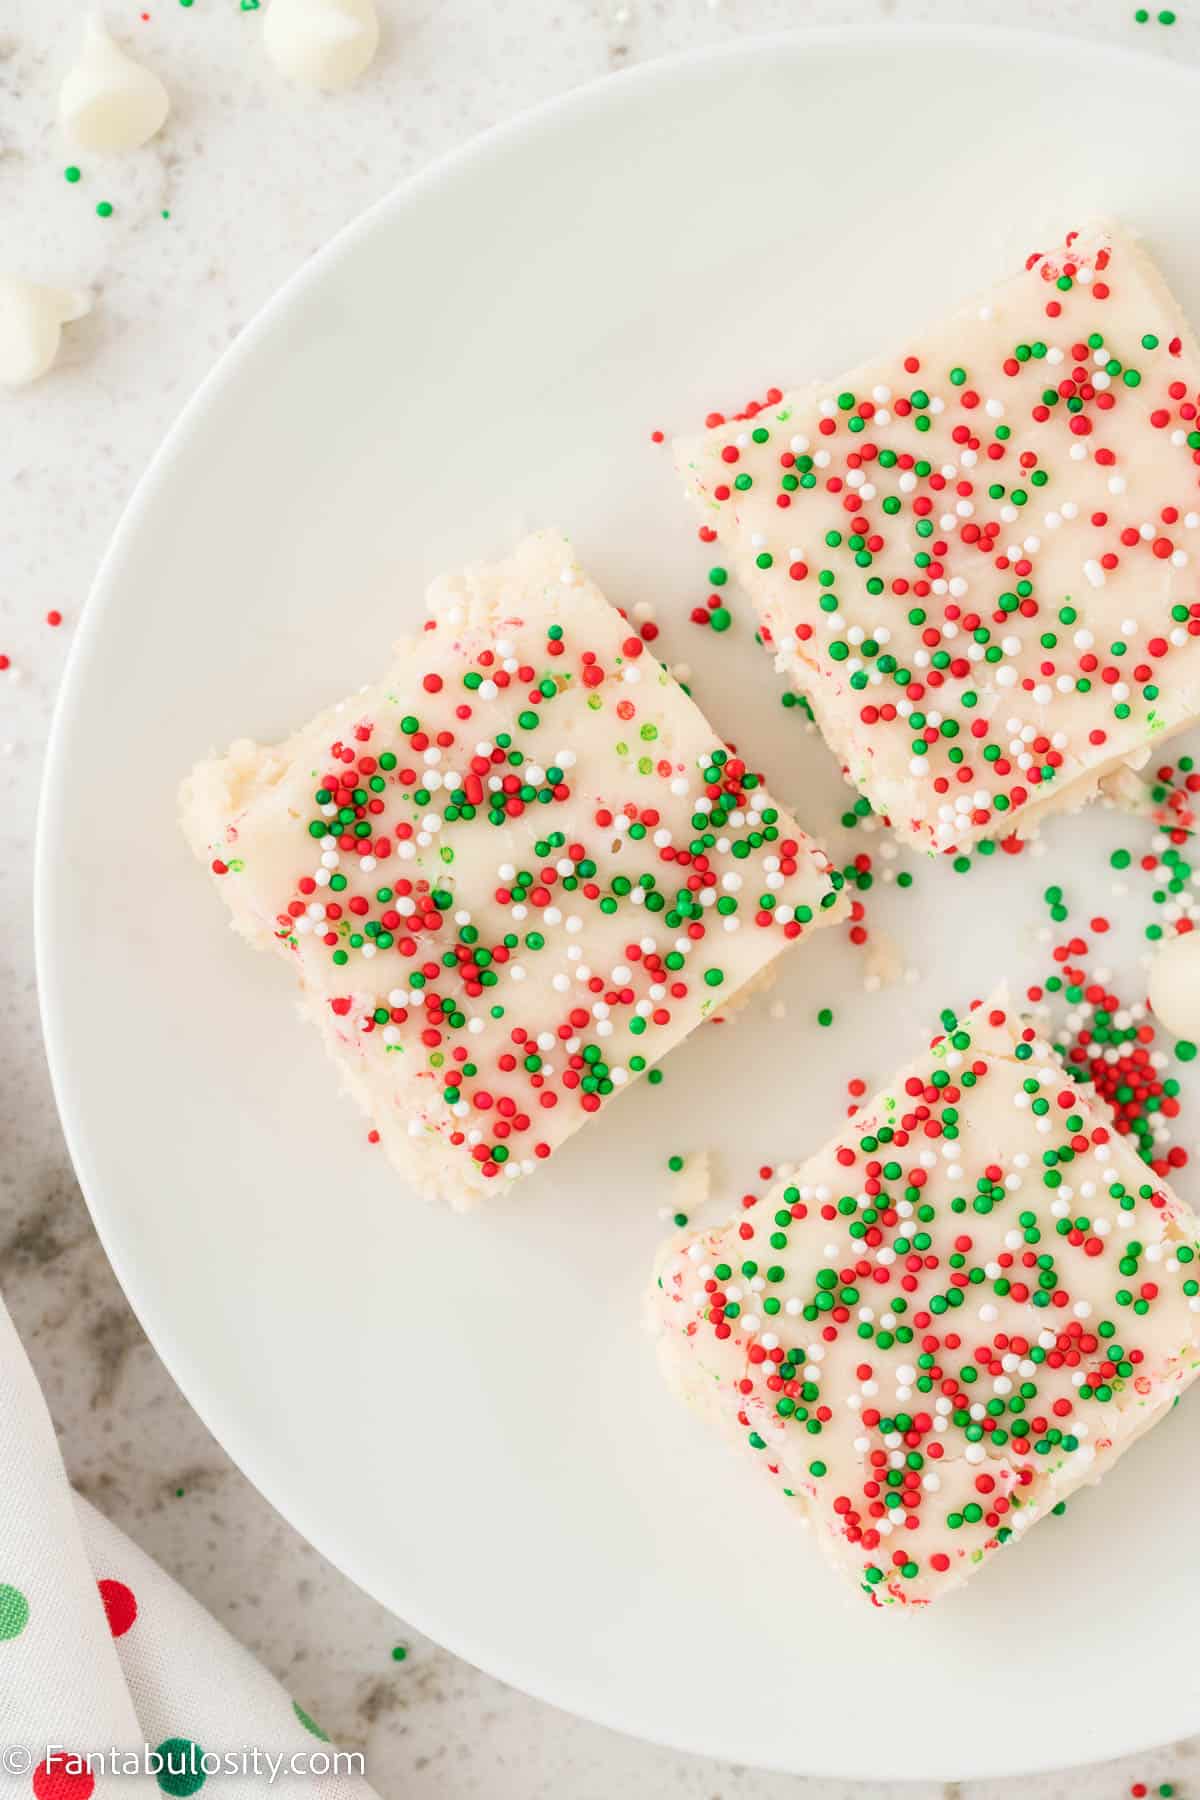 A birdseye photo of a white plate holding three pieces of white fudge topped with red white and green sprinkles